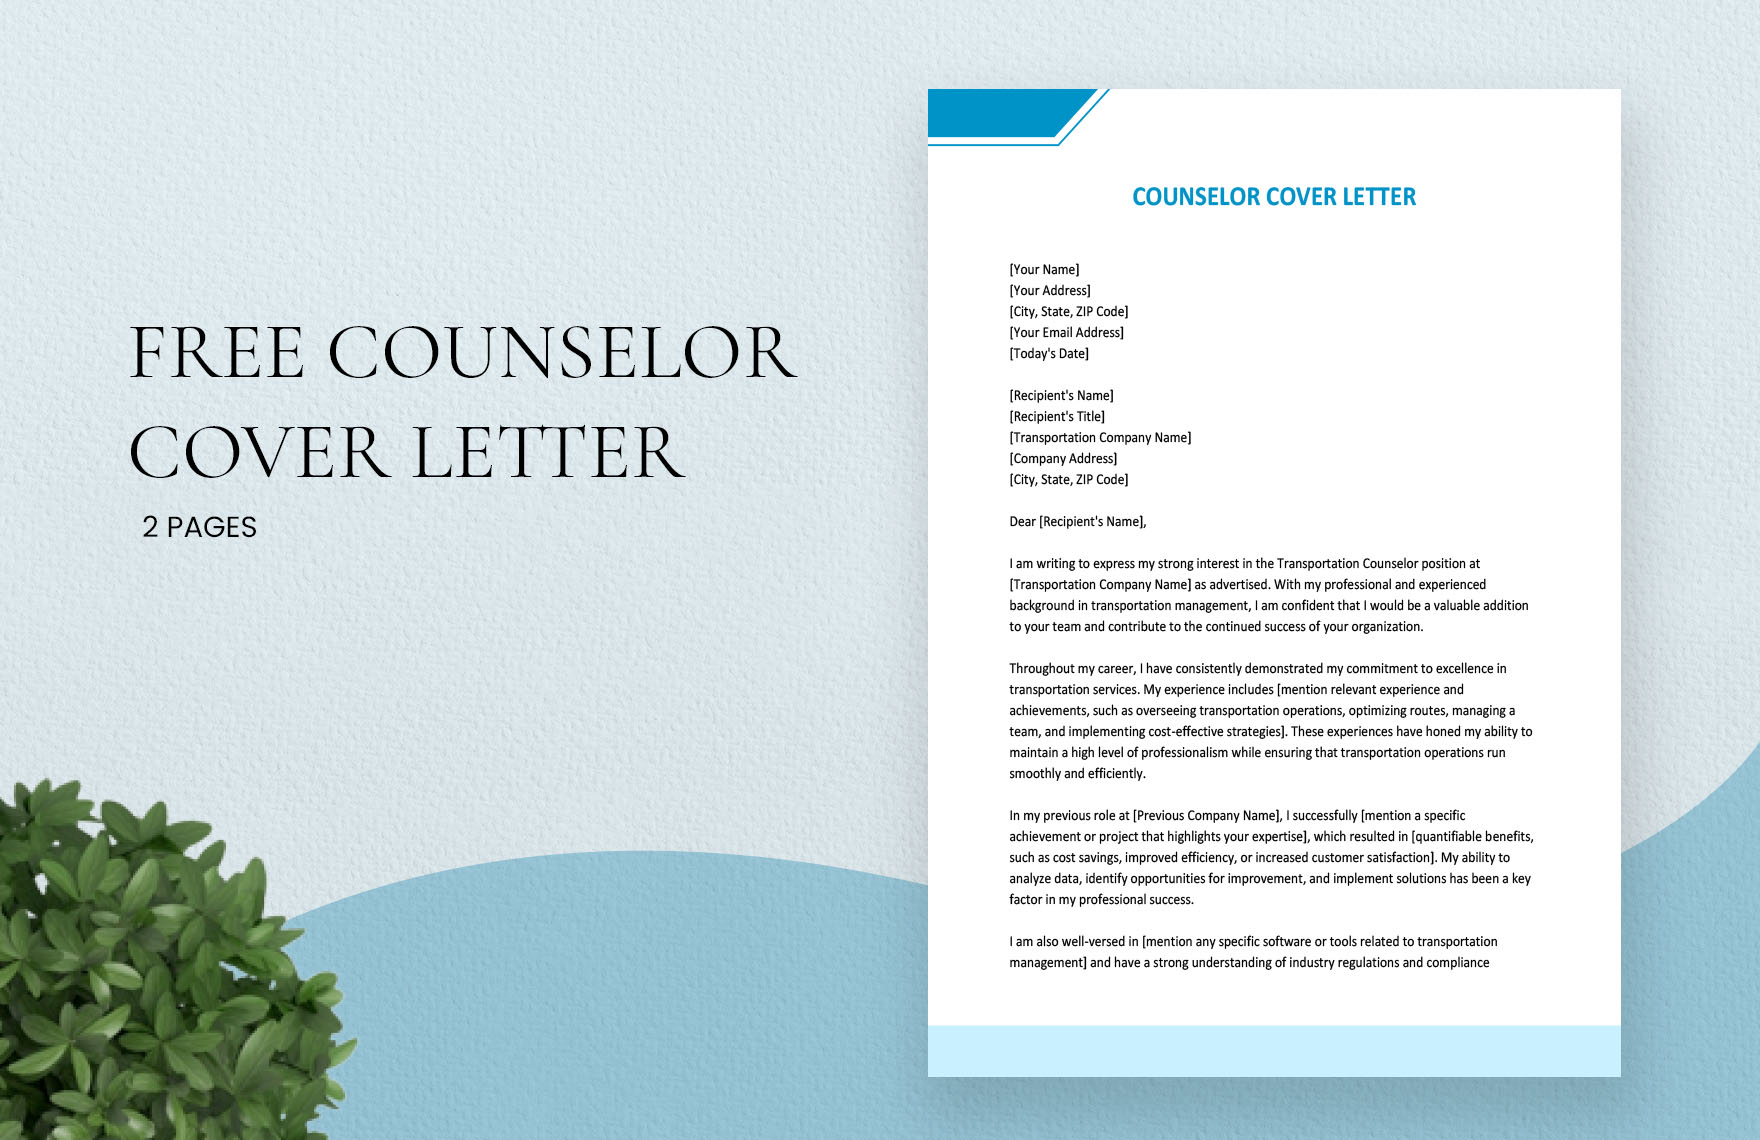 Counselor Cover Letter